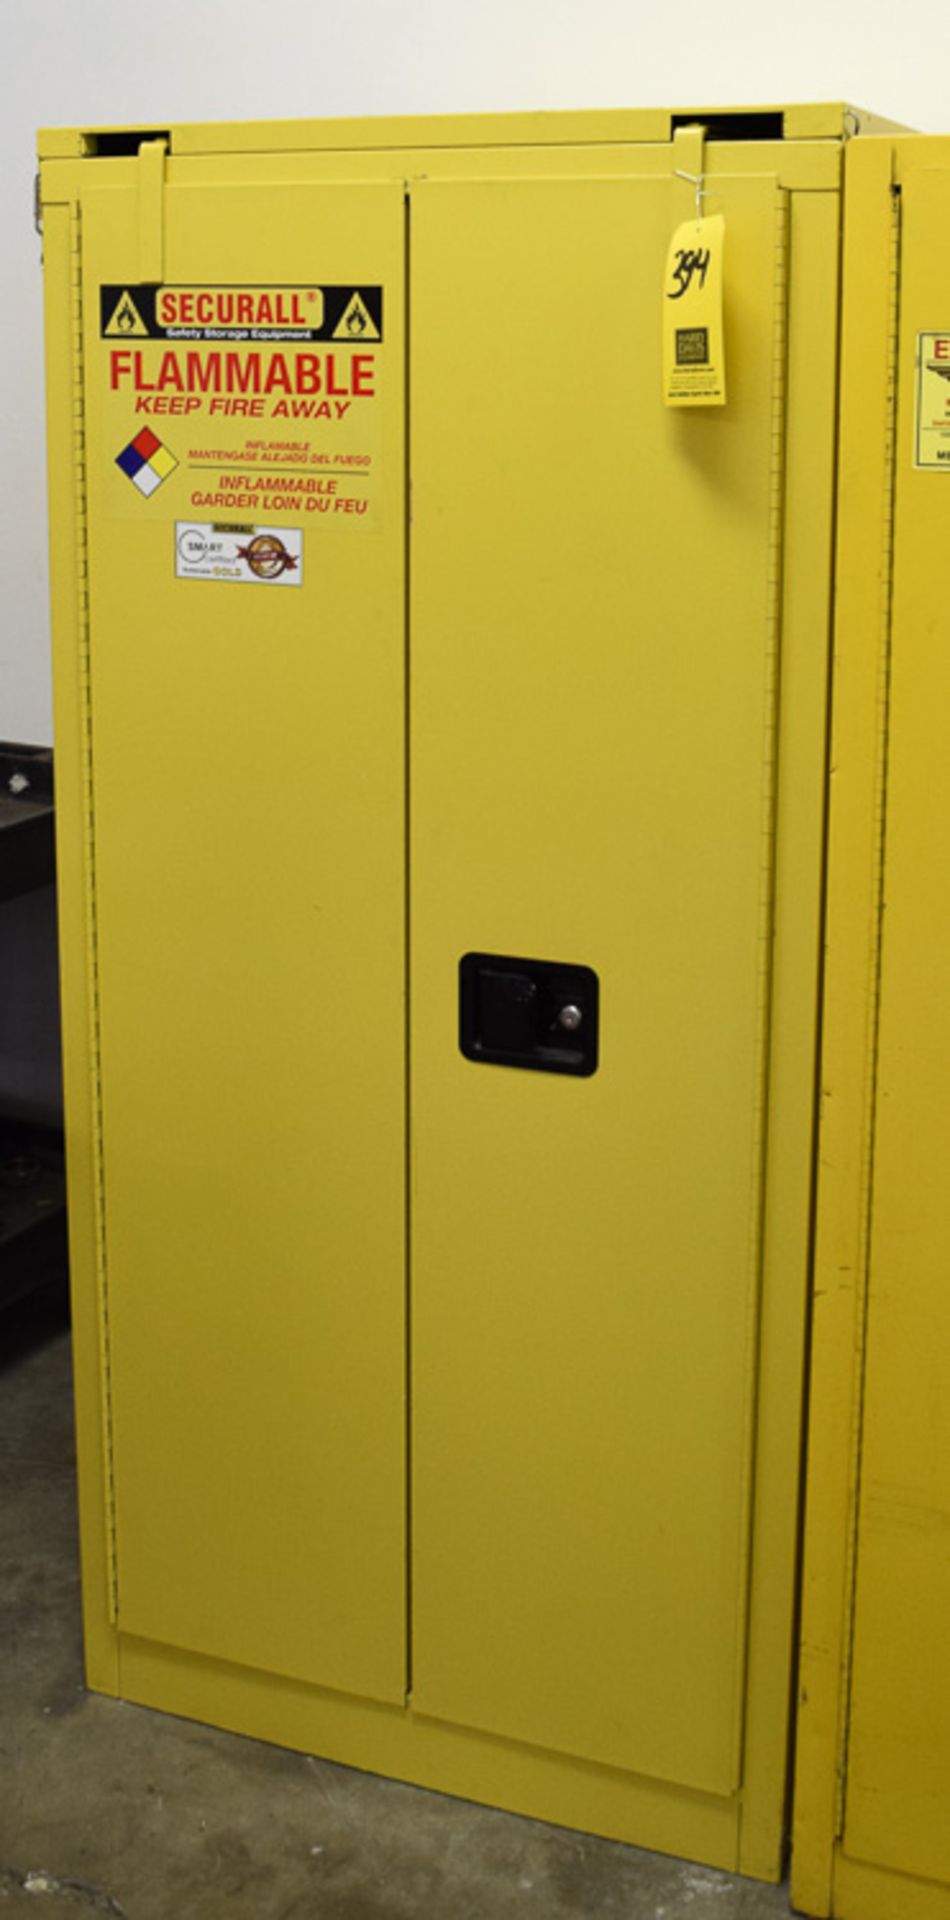 Securall Flammable Storage Cabinet - Rigging Fee $ 25